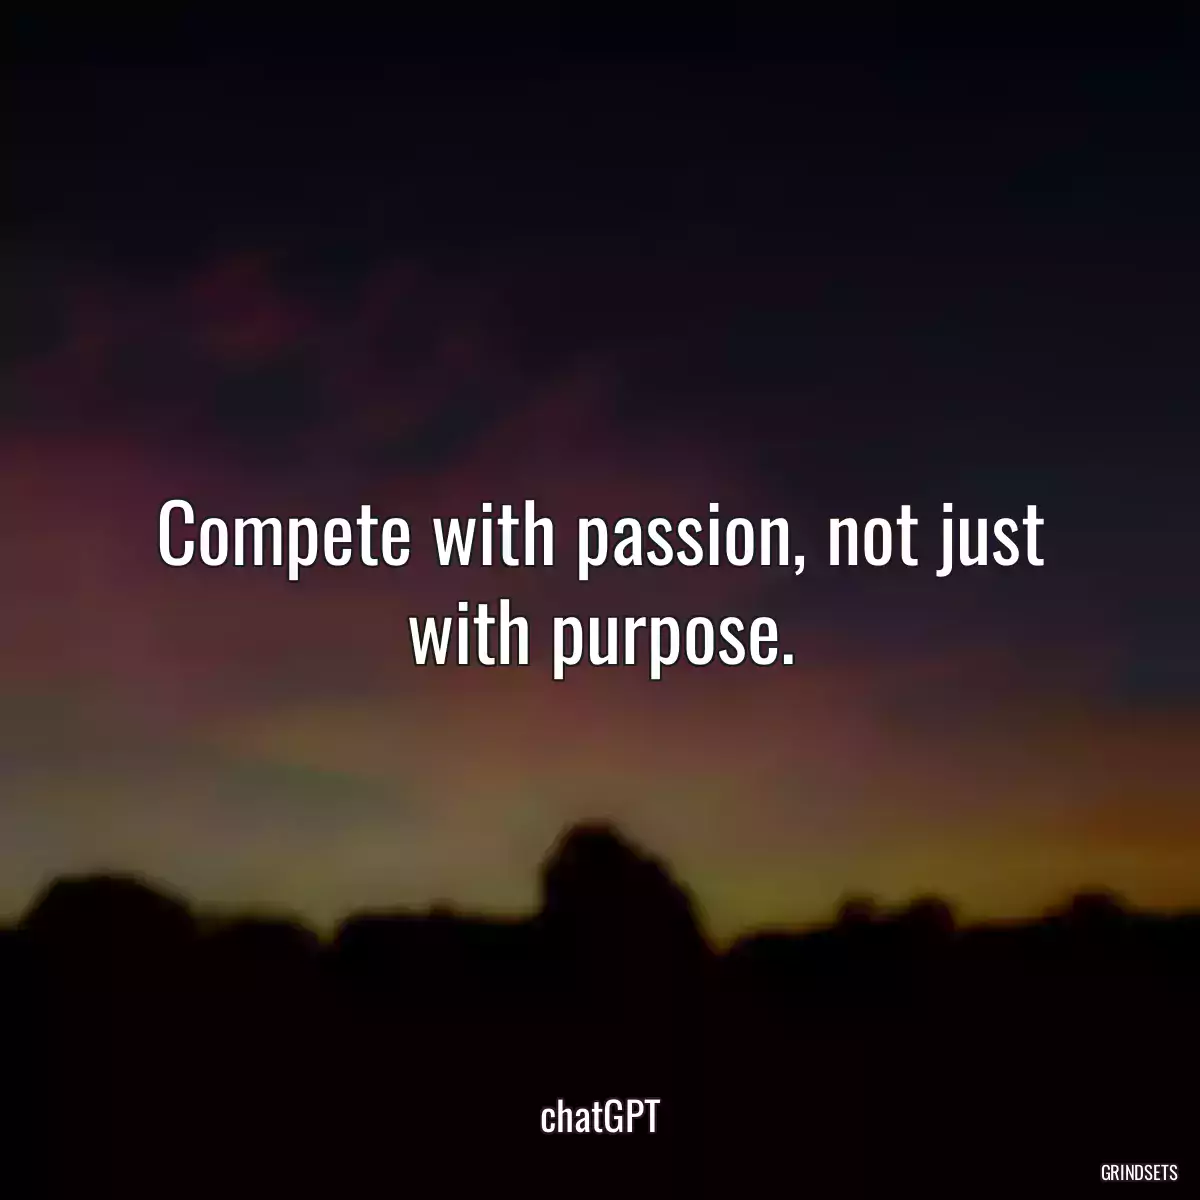 Compete with passion, not just with purpose.